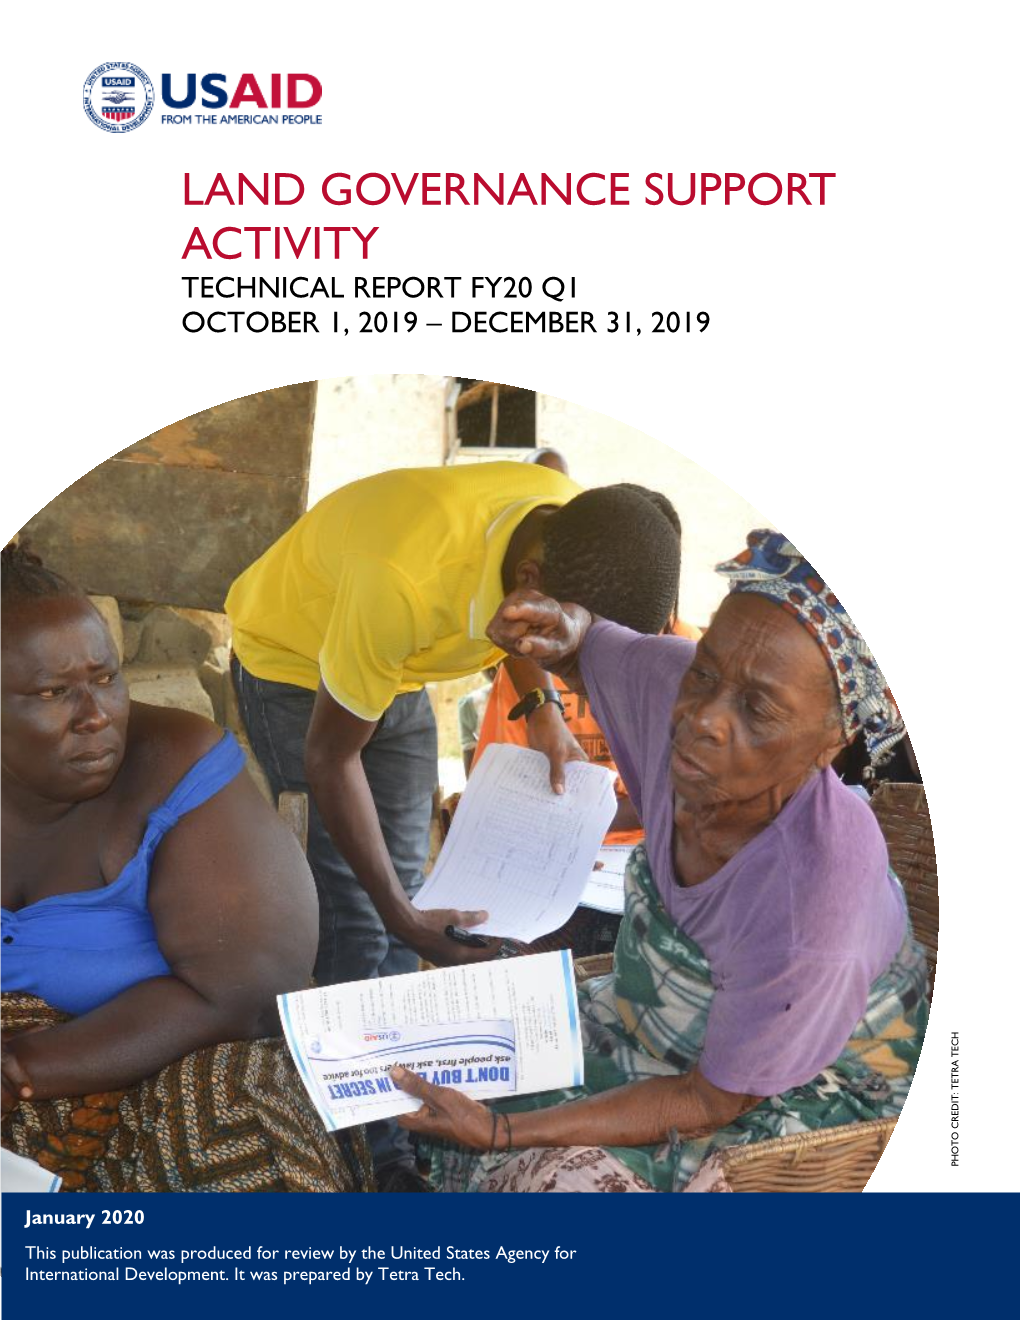 Land Governance Support Activity Technical Report Fy20 Q1 October 1, 2019 – December 31, 2019